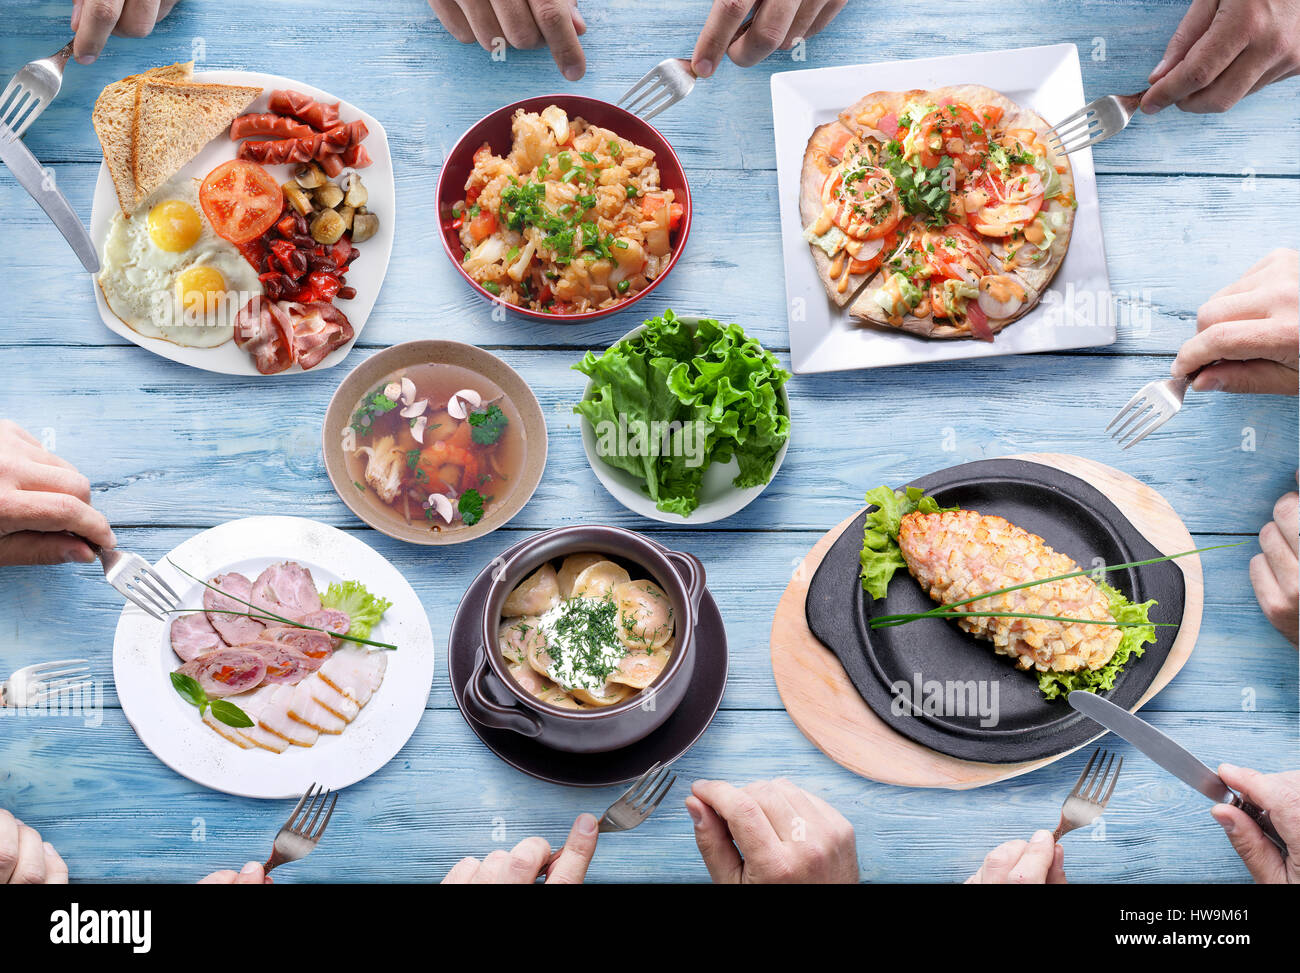 Table covered with different meals and people hands. Stock Photo